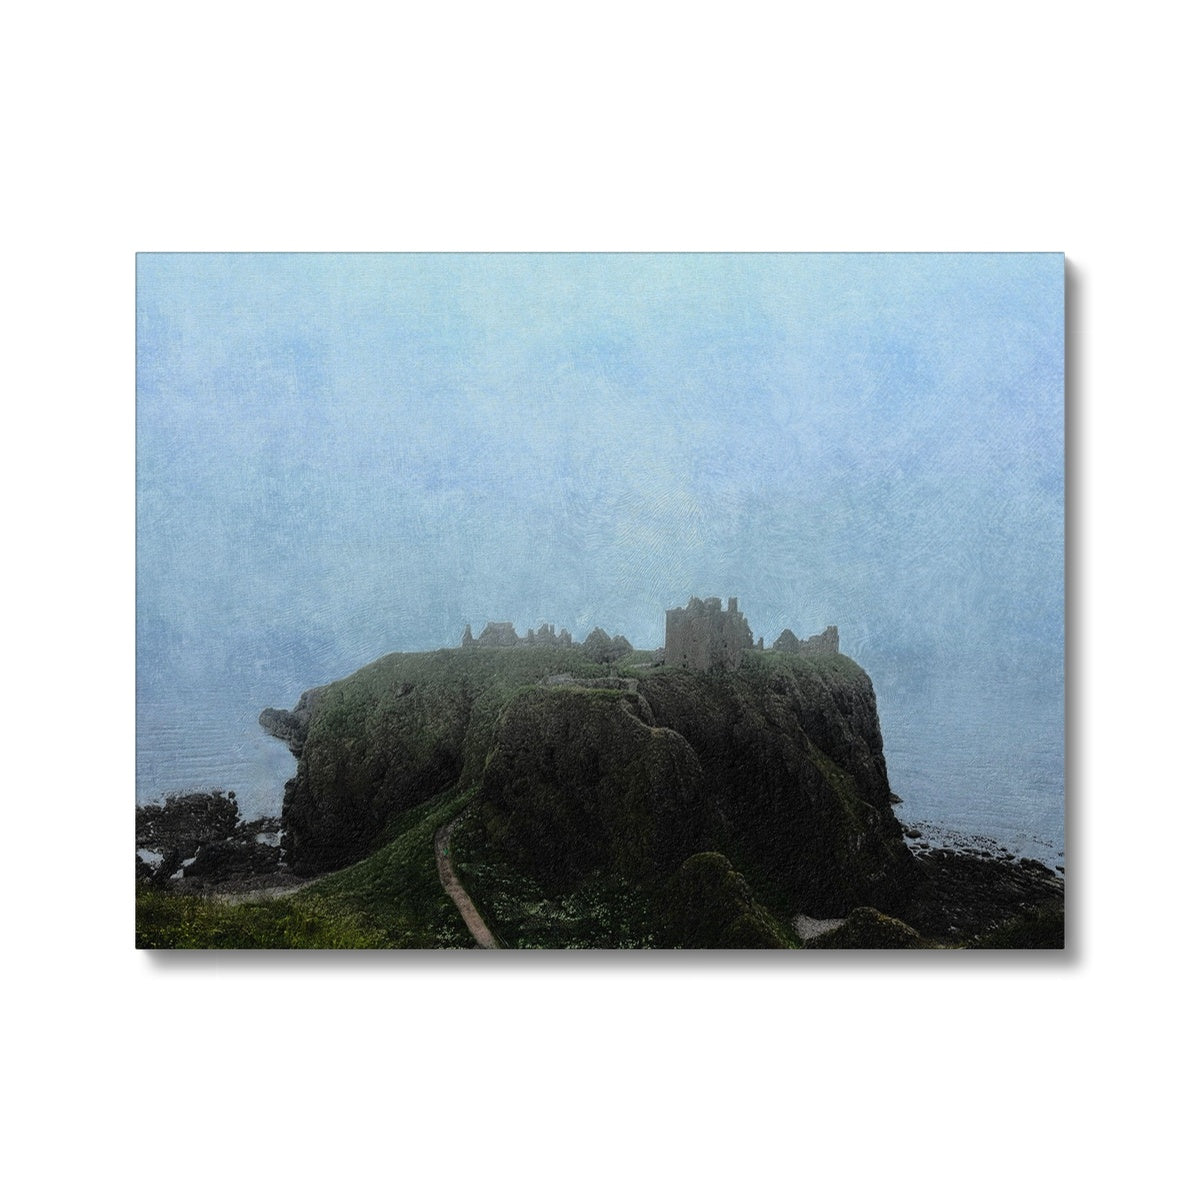 Dunnottar Castle Mist Painting | Canvas From Scotland-Contemporary Stretched Canvas Prints-Scottish Castles Art Gallery-24"x18"-Paintings, Prints, Homeware, Art Gifts From Scotland By Scottish Artist Kevin Hunter